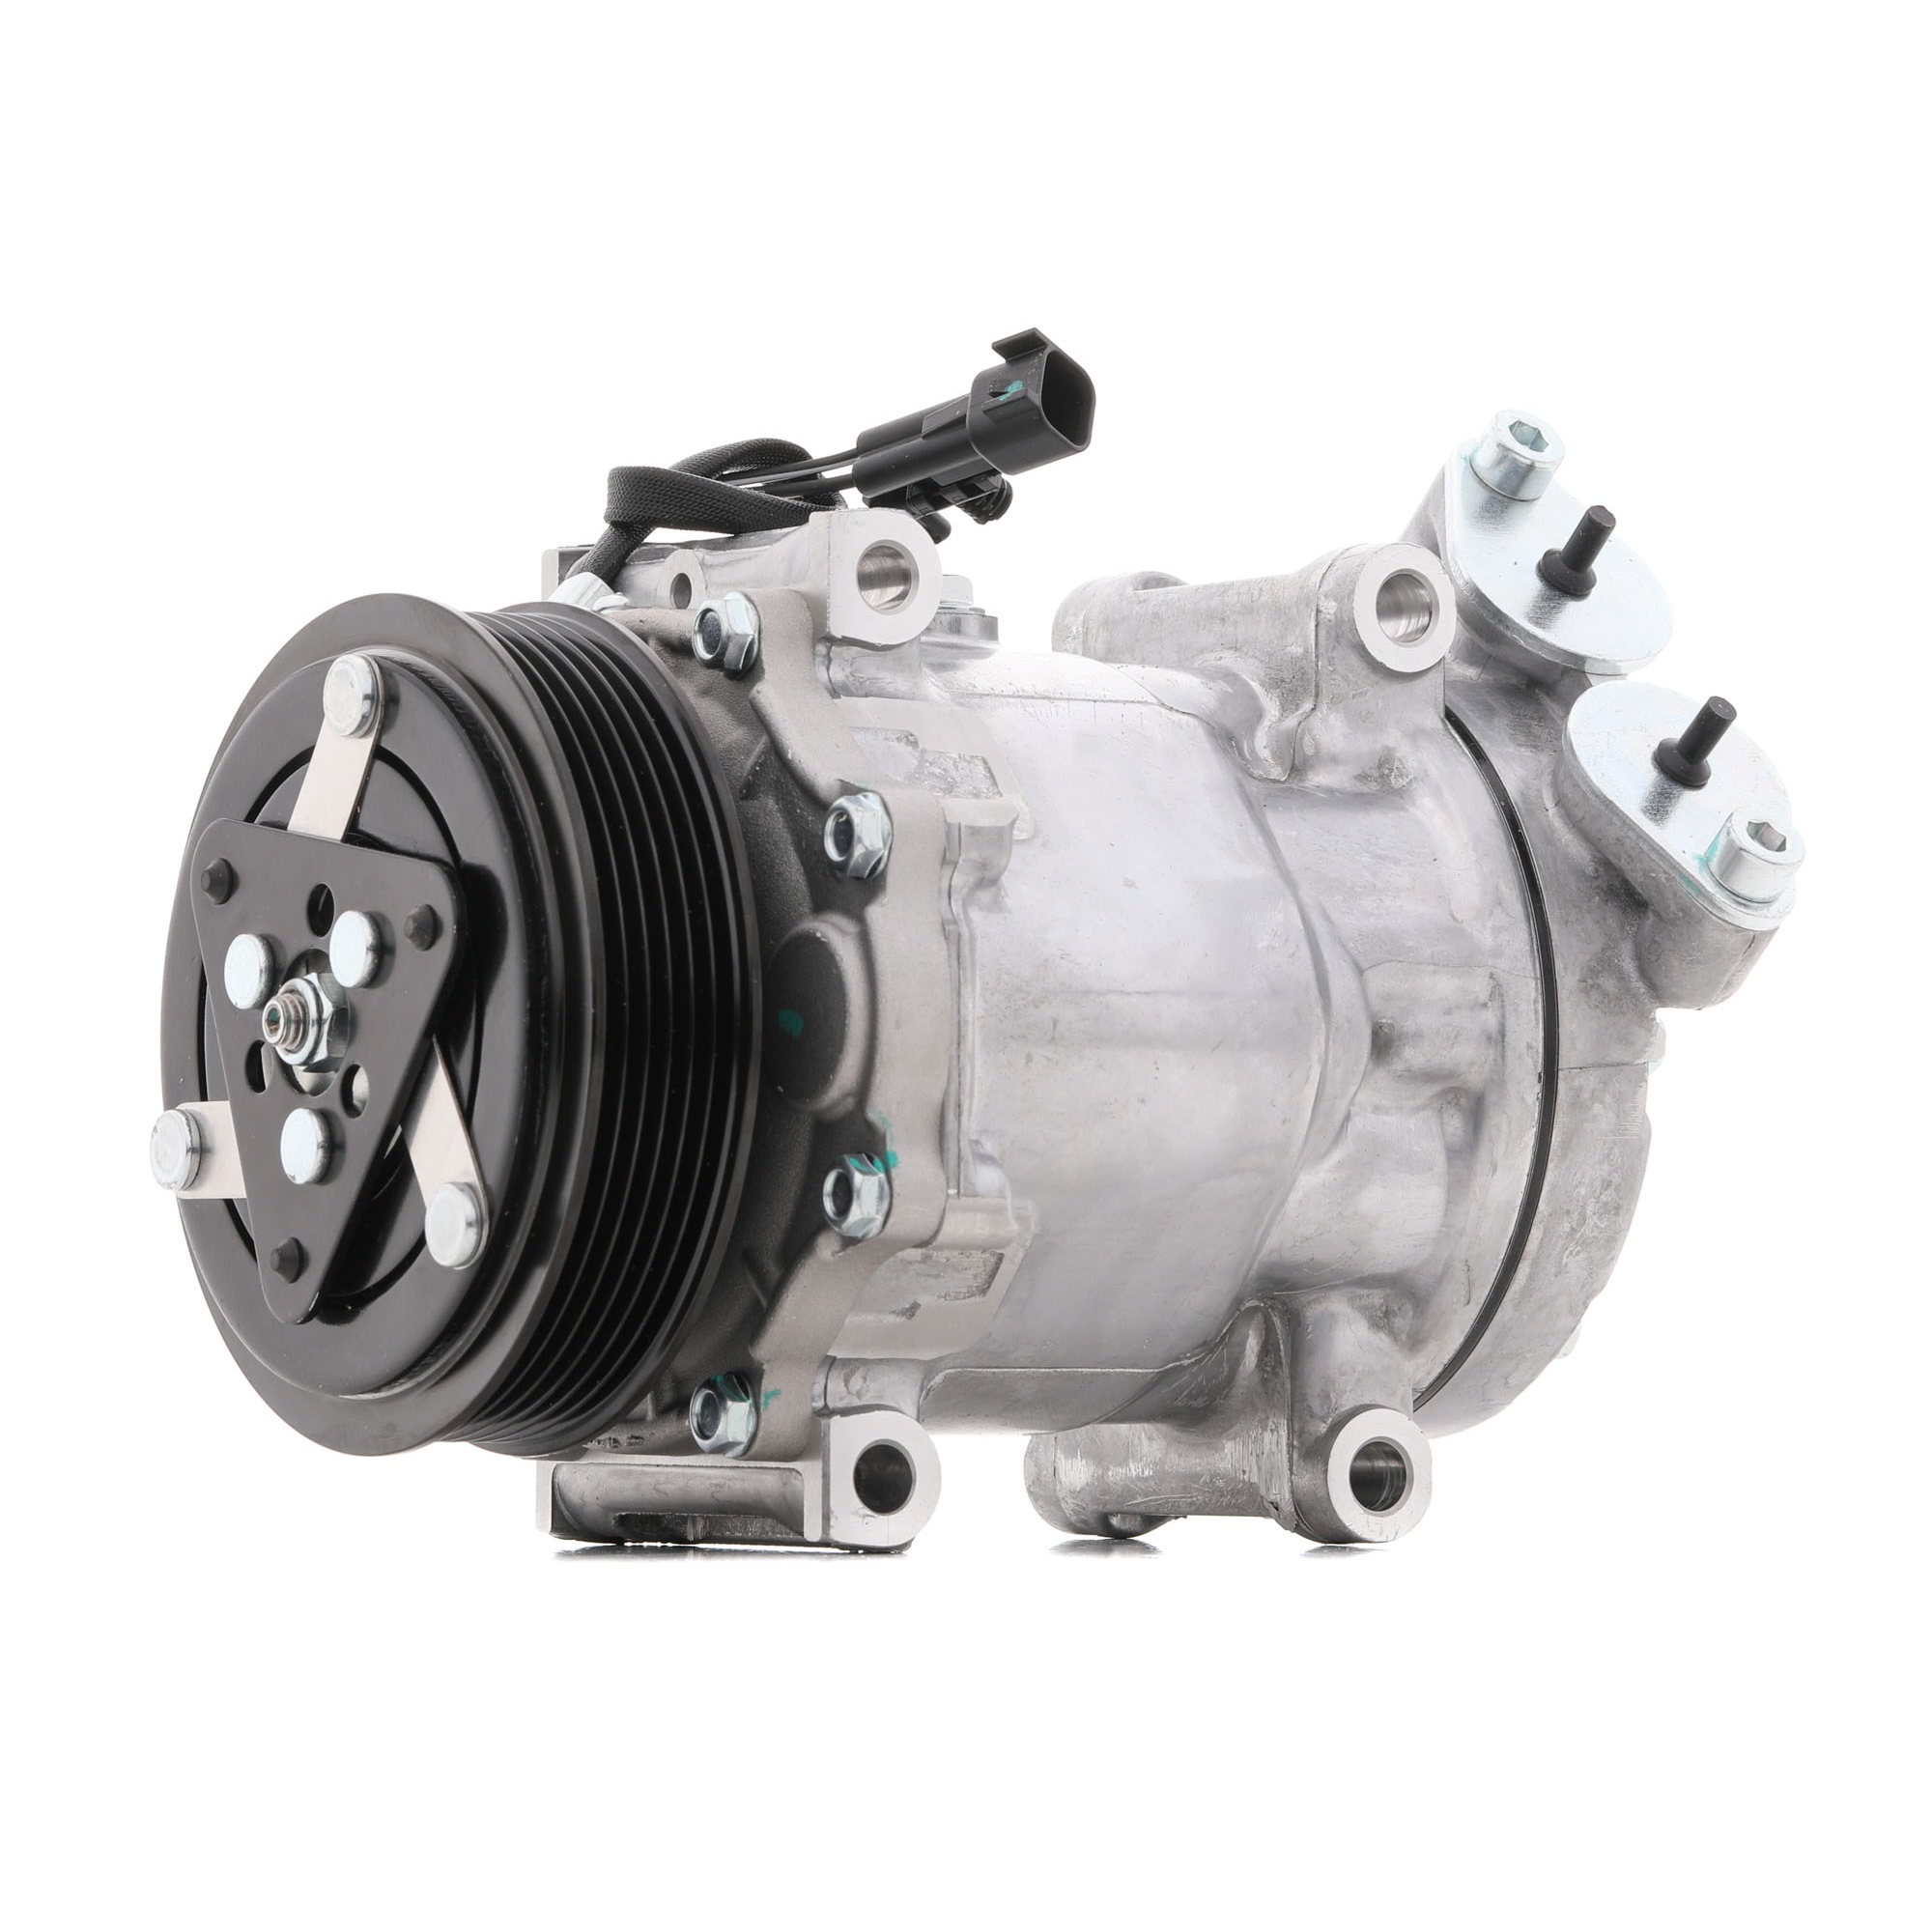 VALEO 813236 Air conditioning compressor MAZDA experience and price